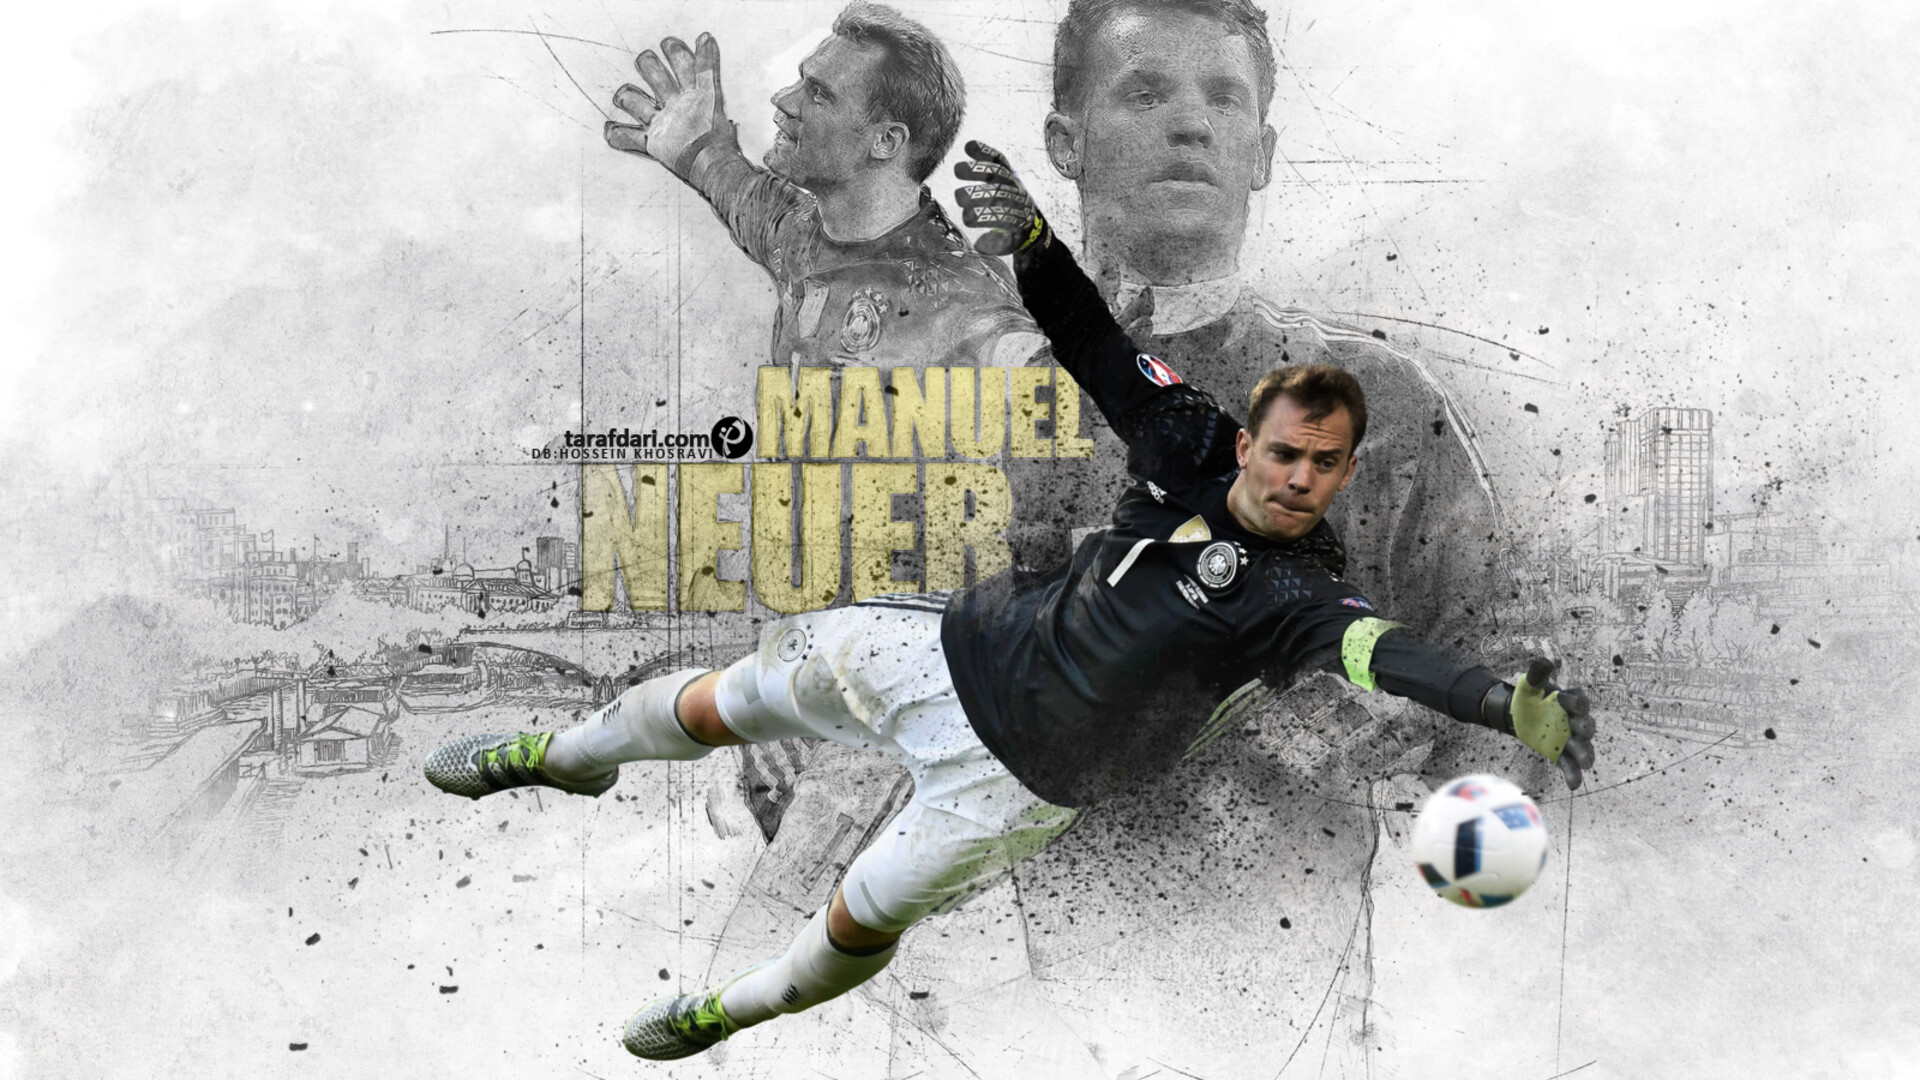 Germany Soccer Team: Manuel Neuer, Germany's number one goalkeeper for the 2010 FIFA World Cup in South Africa. 1920x1080 Full HD Background.